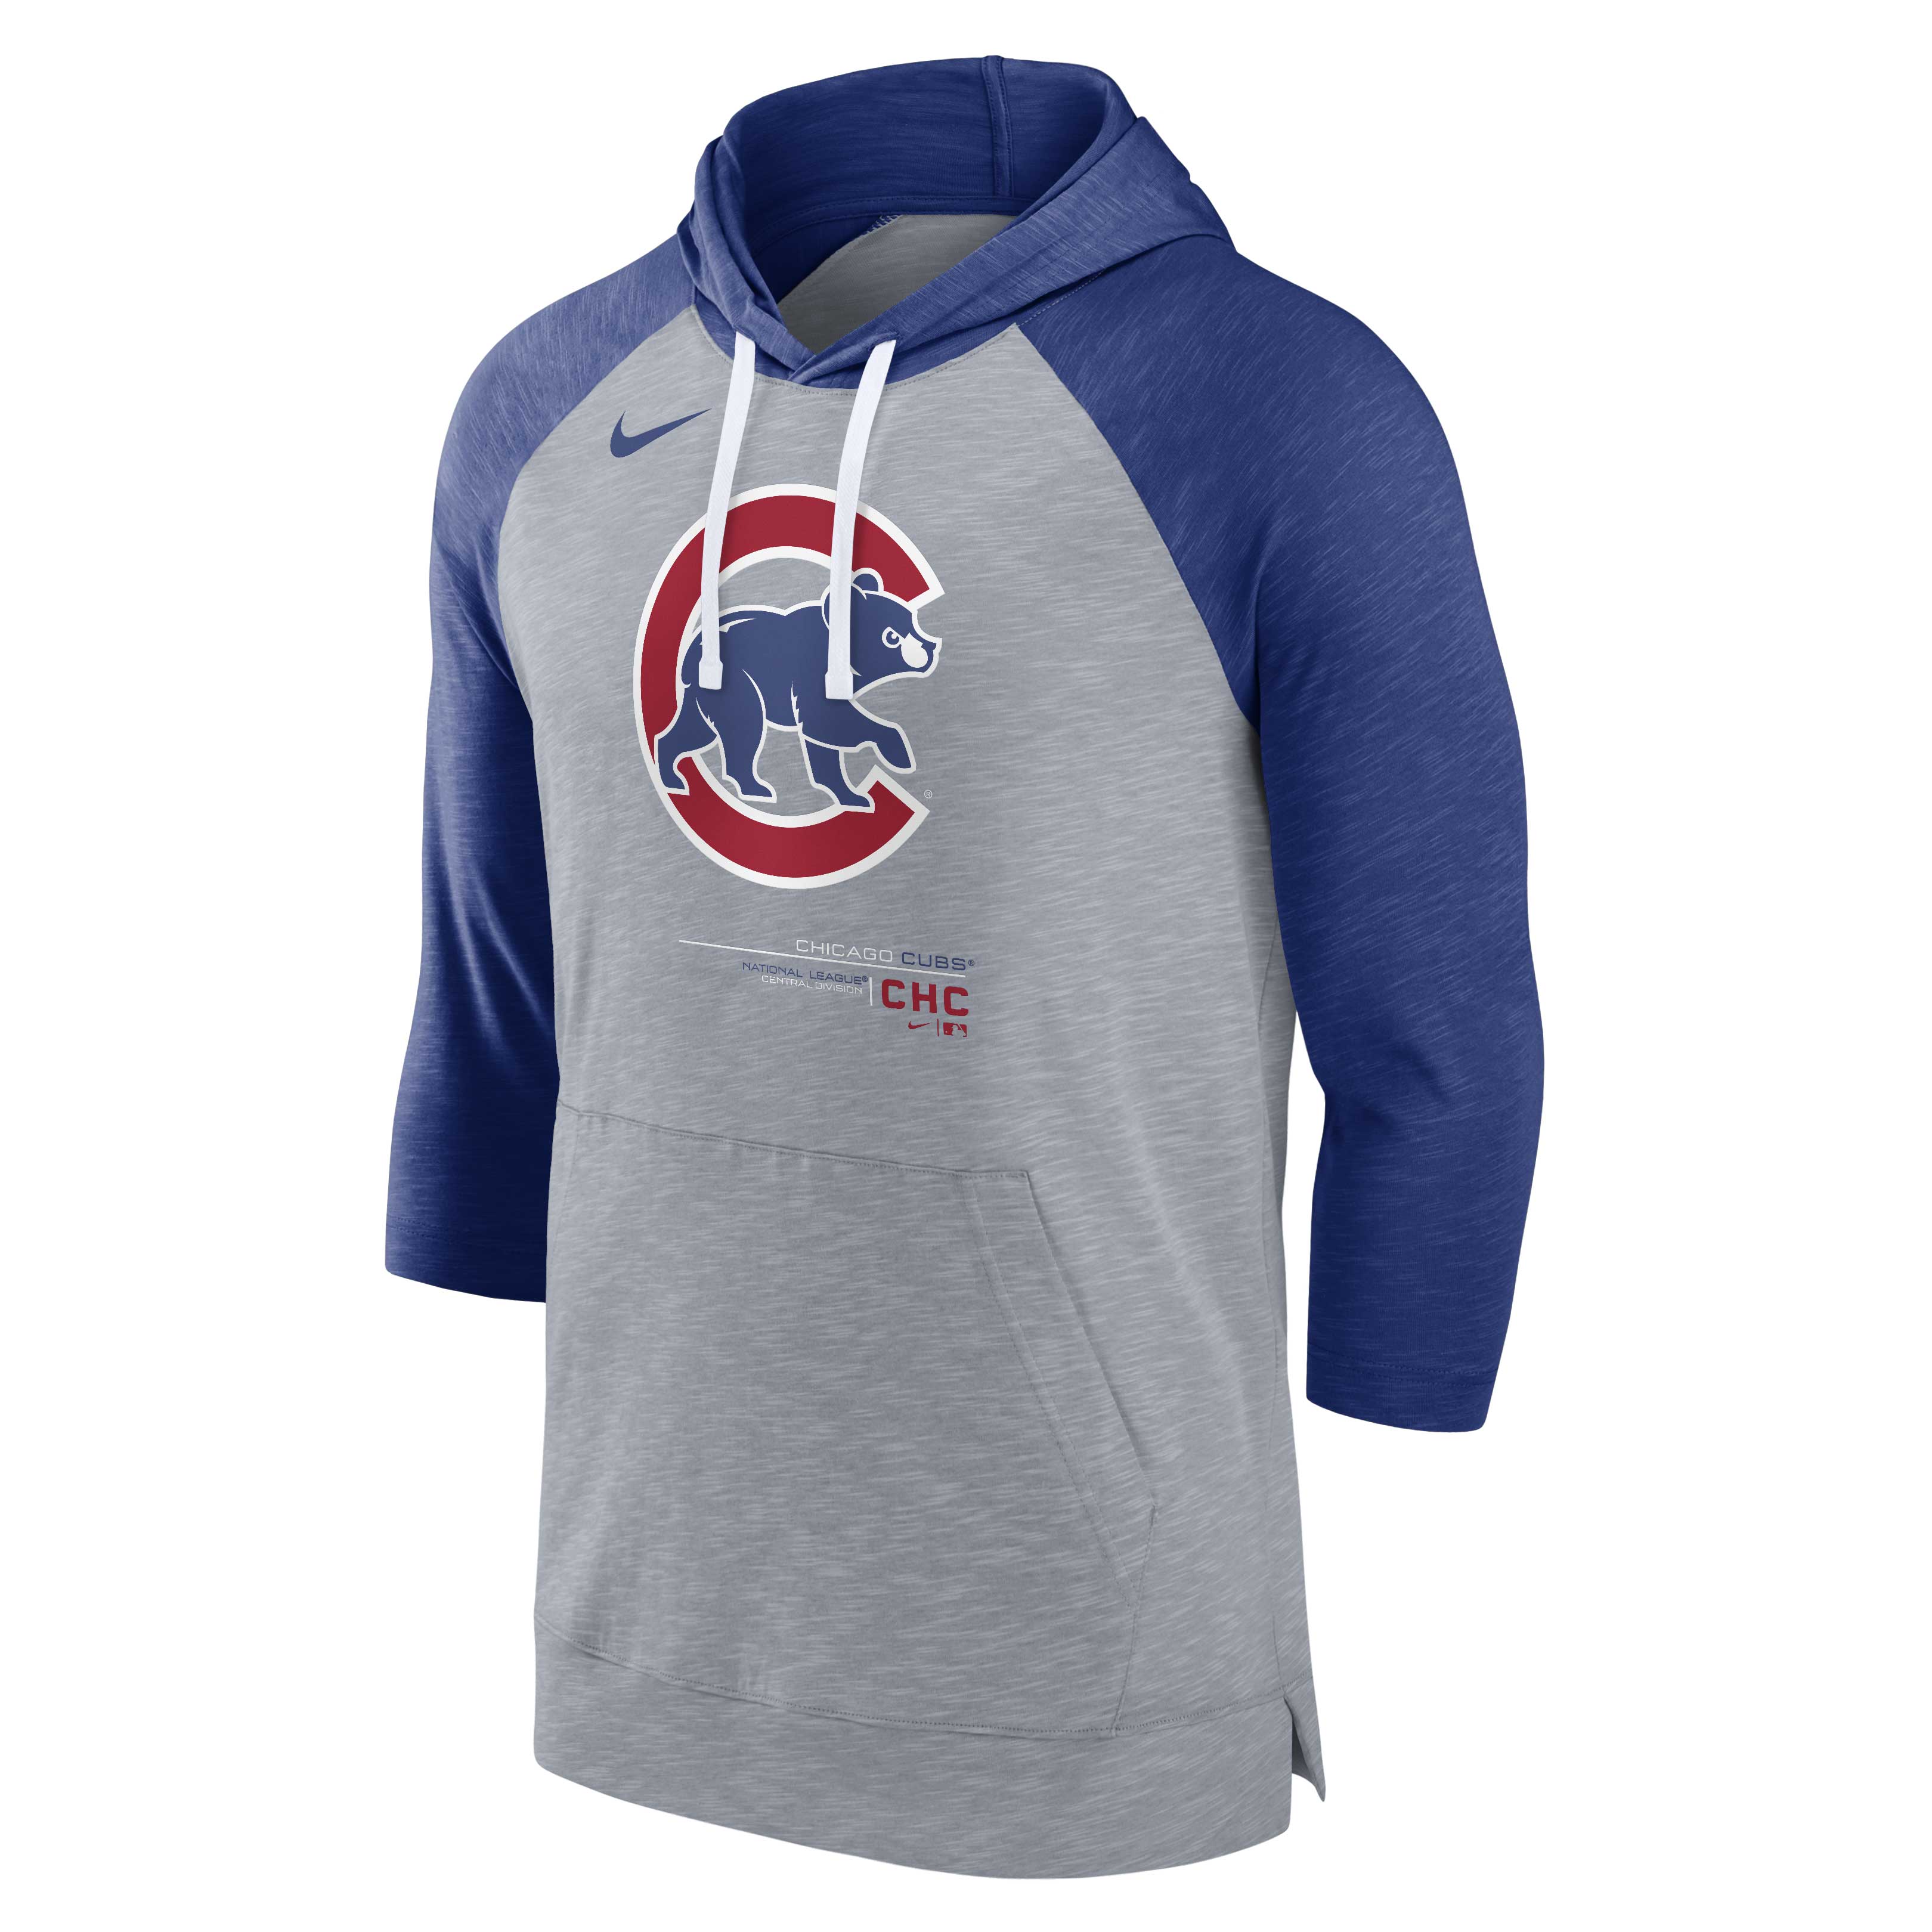 Officially Licensed MLB Chicago Cubs Hoodie T-Shirt(RAGLAN SLEEVES